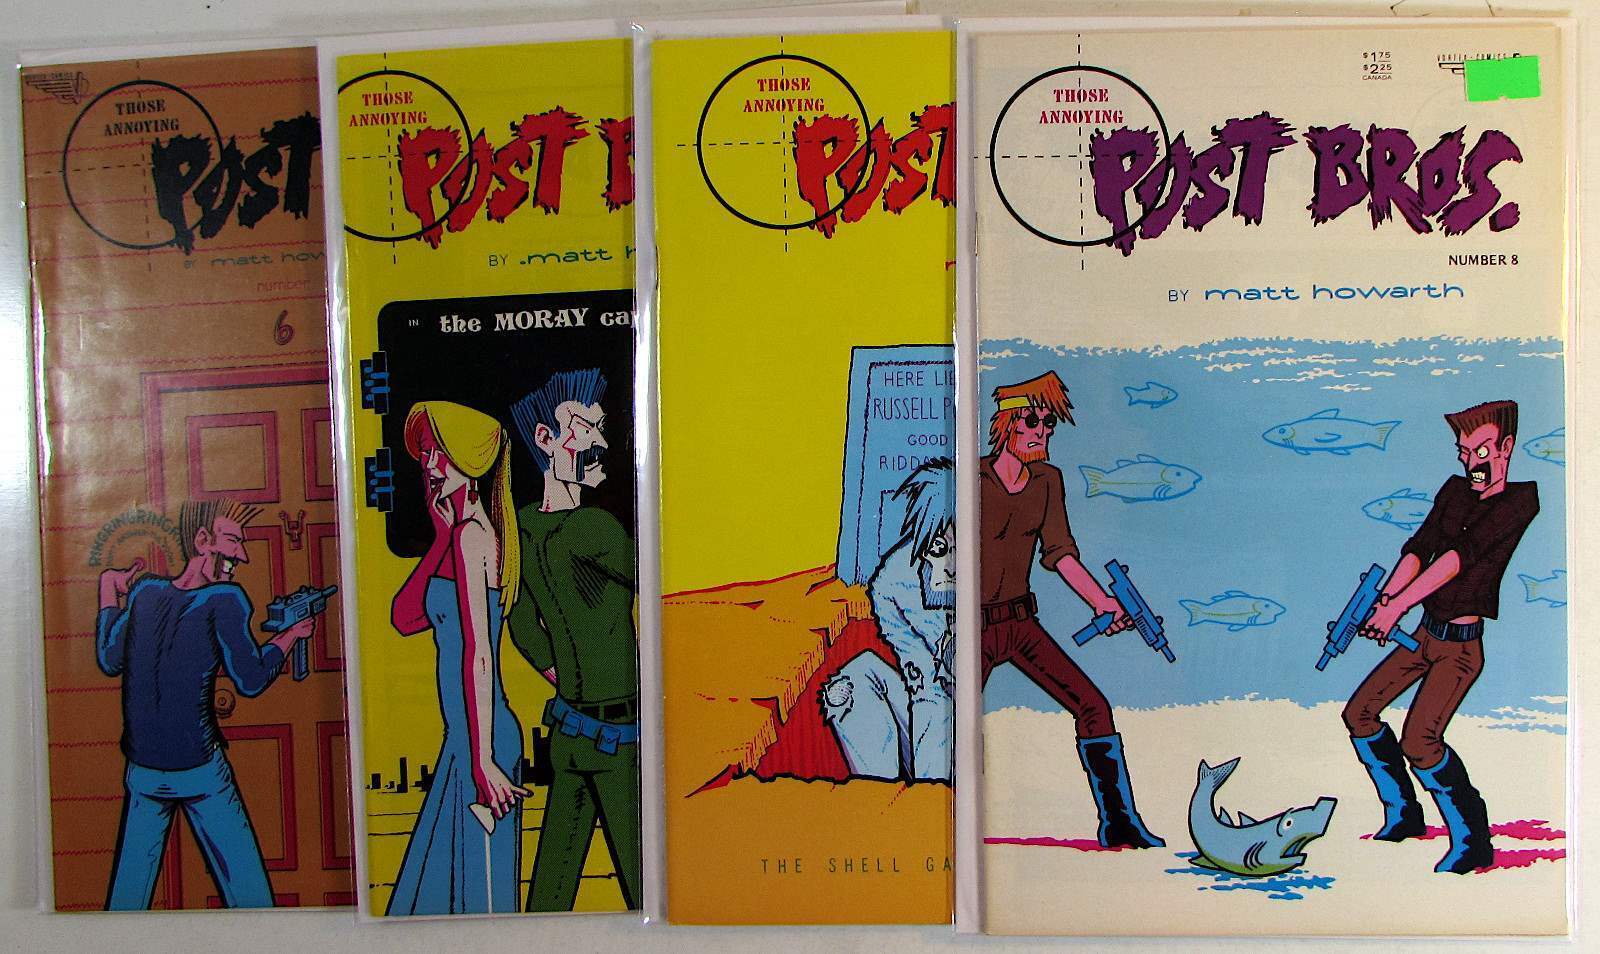 Those Annoying Post Brothers Lot of 4 #6,7,8,11 Rip Off Press (1987) Comics